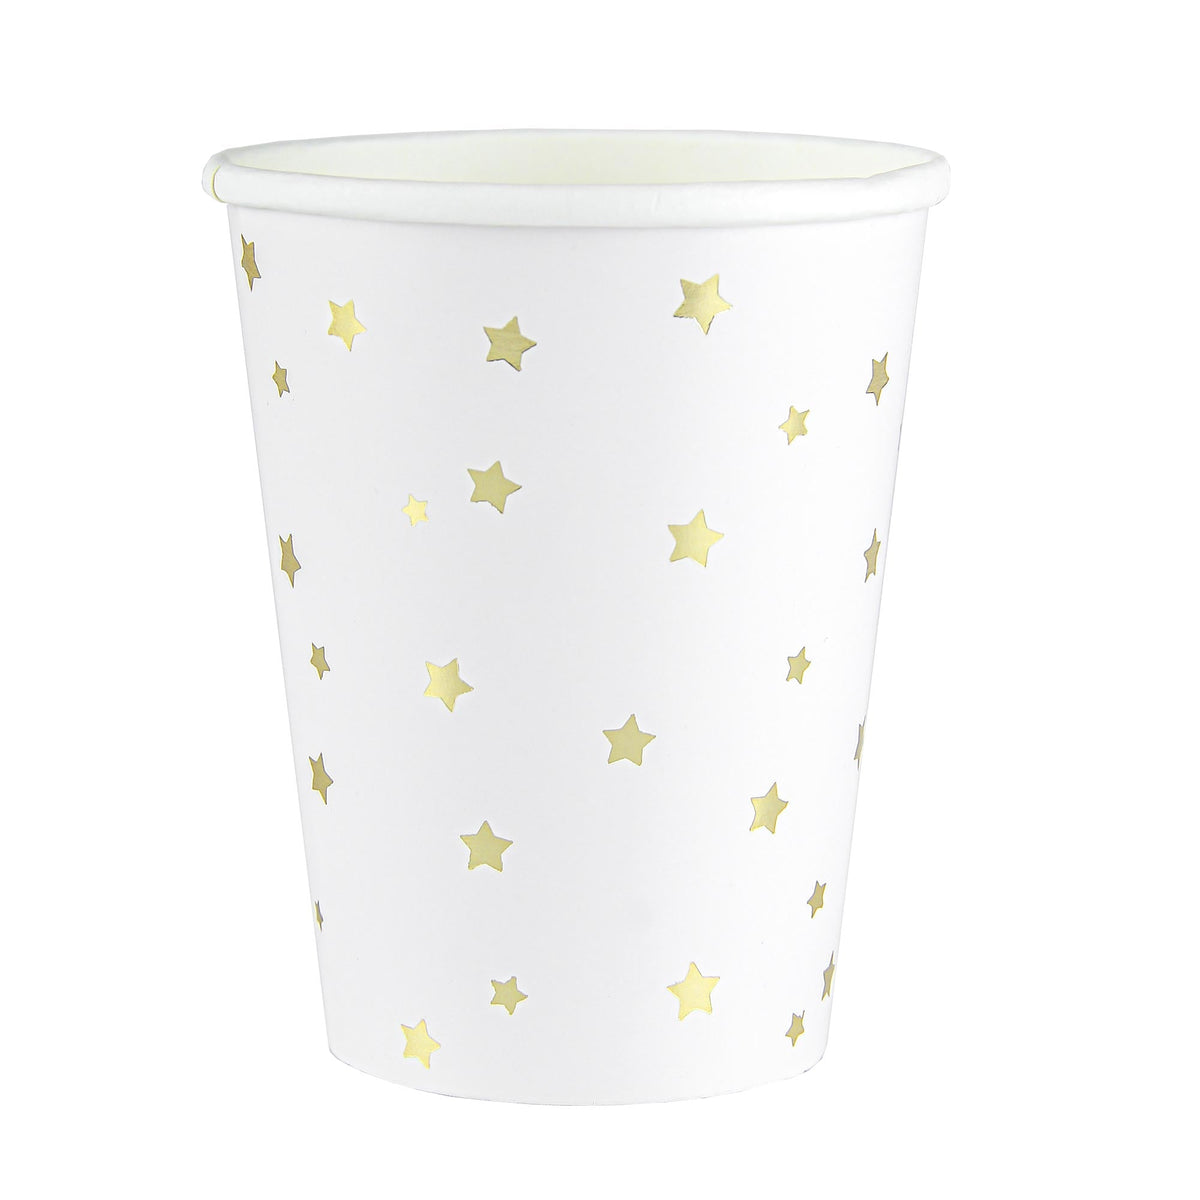 YIWU SANDY PAPER PRODUCTS CO., LTD Everyday Entertaining Little Stars Paper Cups, Gold, 9 oz, 8 Count 810120713120